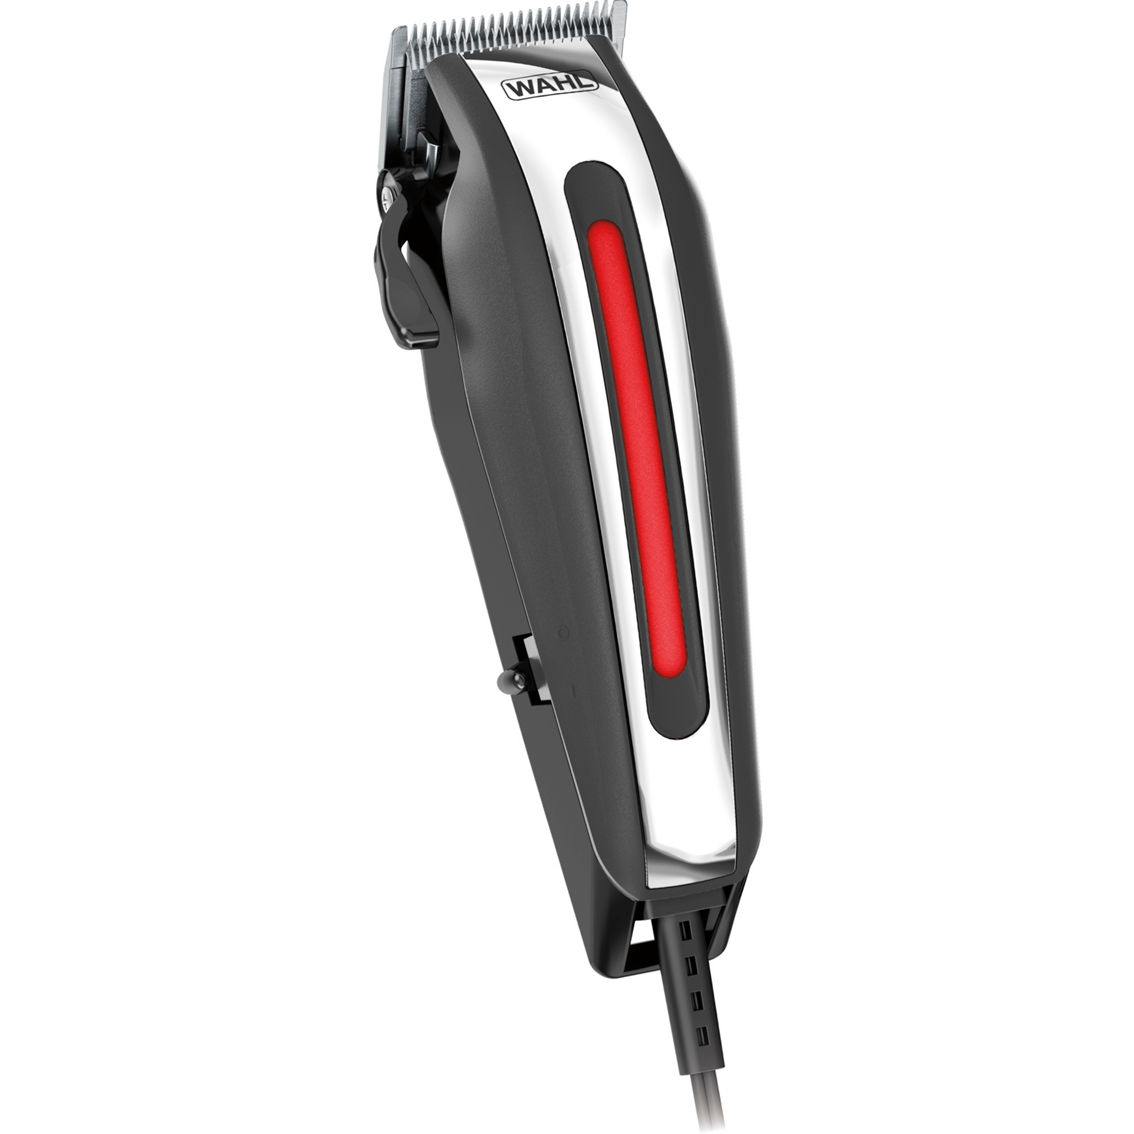 Wahl Fade Pro Clippers 79790 - Image 3 of 3